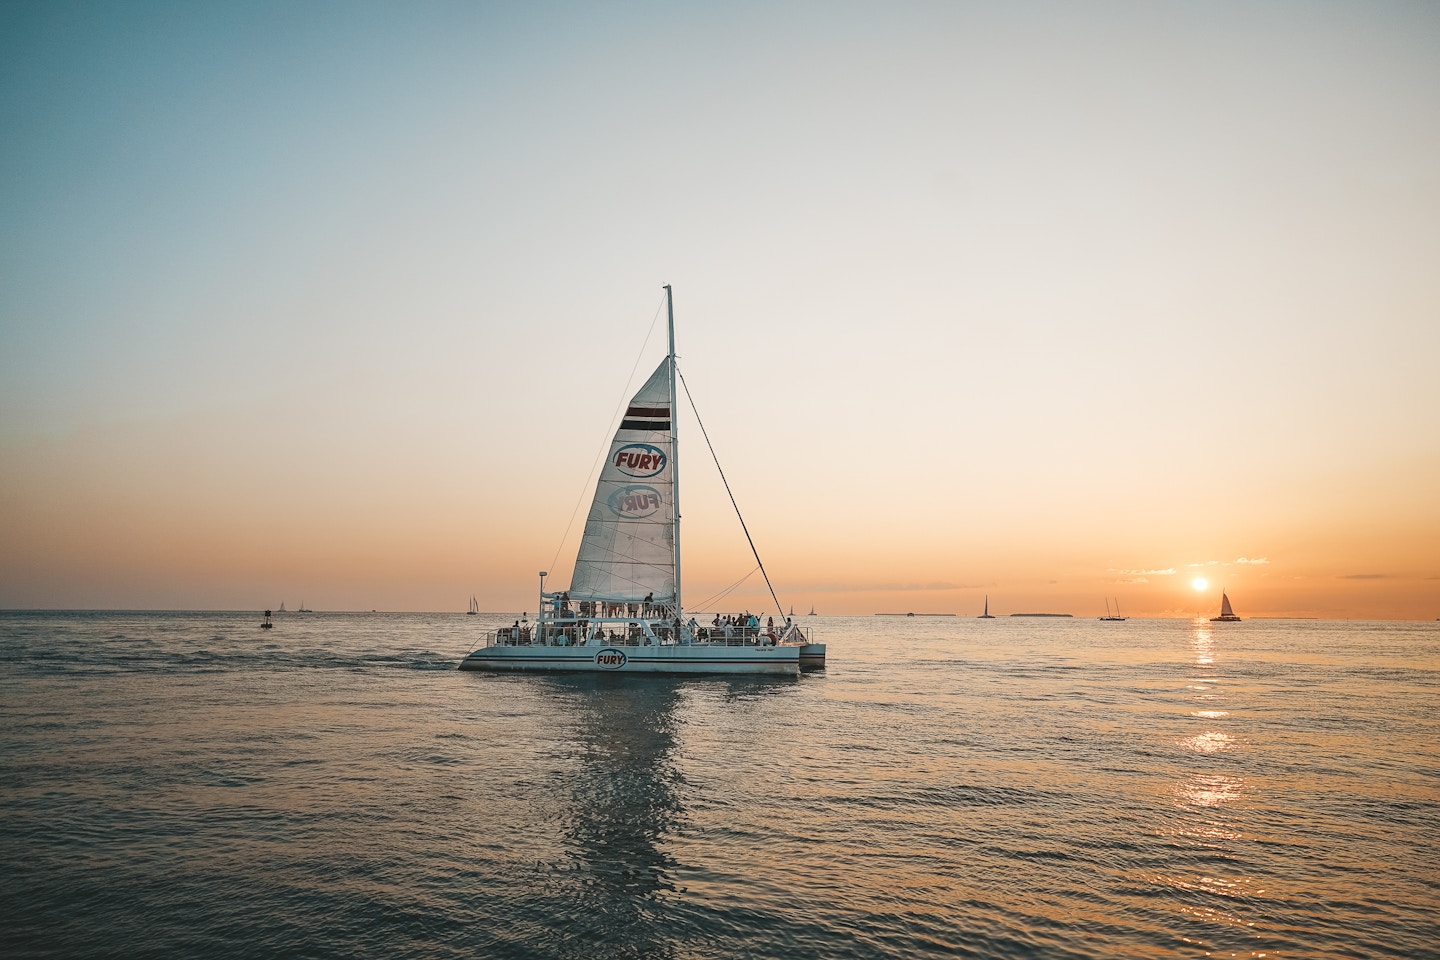 During your day trip to Key West you must catch a sunset cruise with Fury Key West along the harbour!